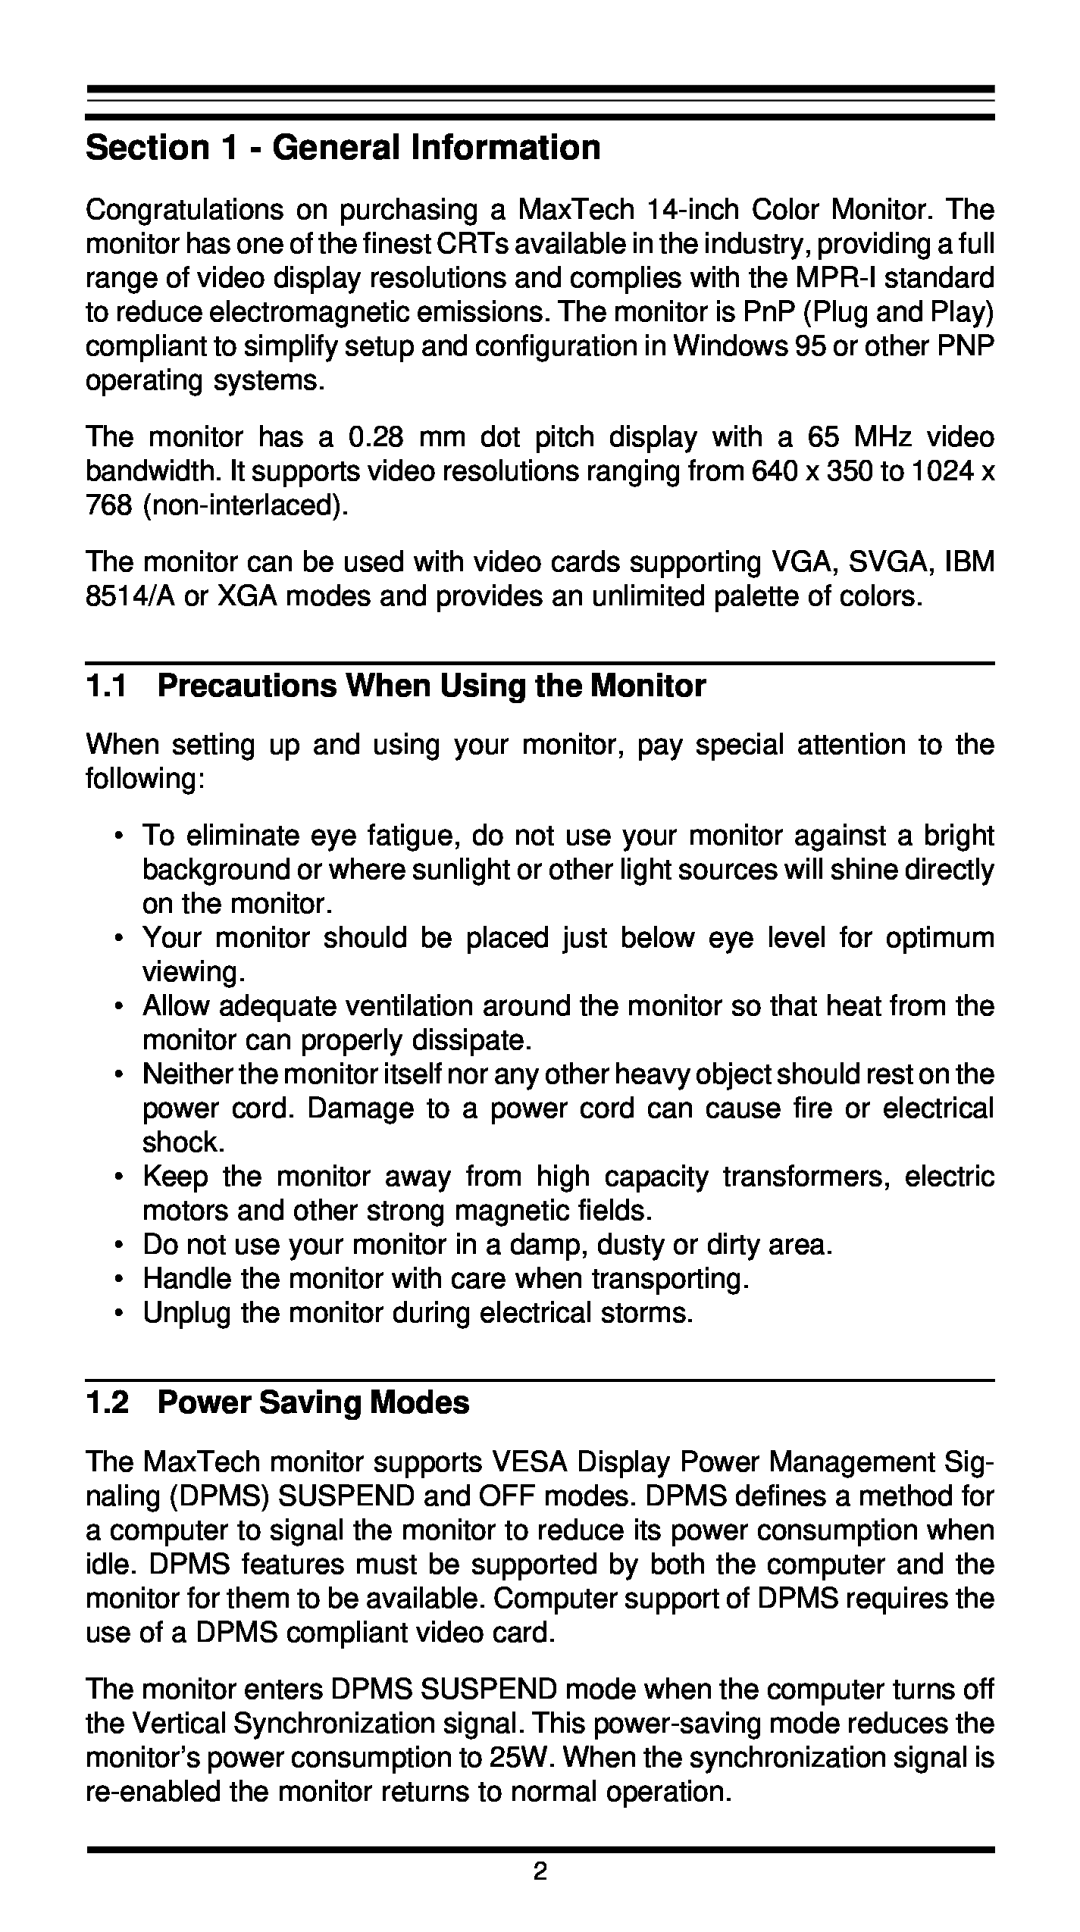 MaxTech XT4862 user manual General Information, Precautions When Using the Monitor, Power Saving Modes 